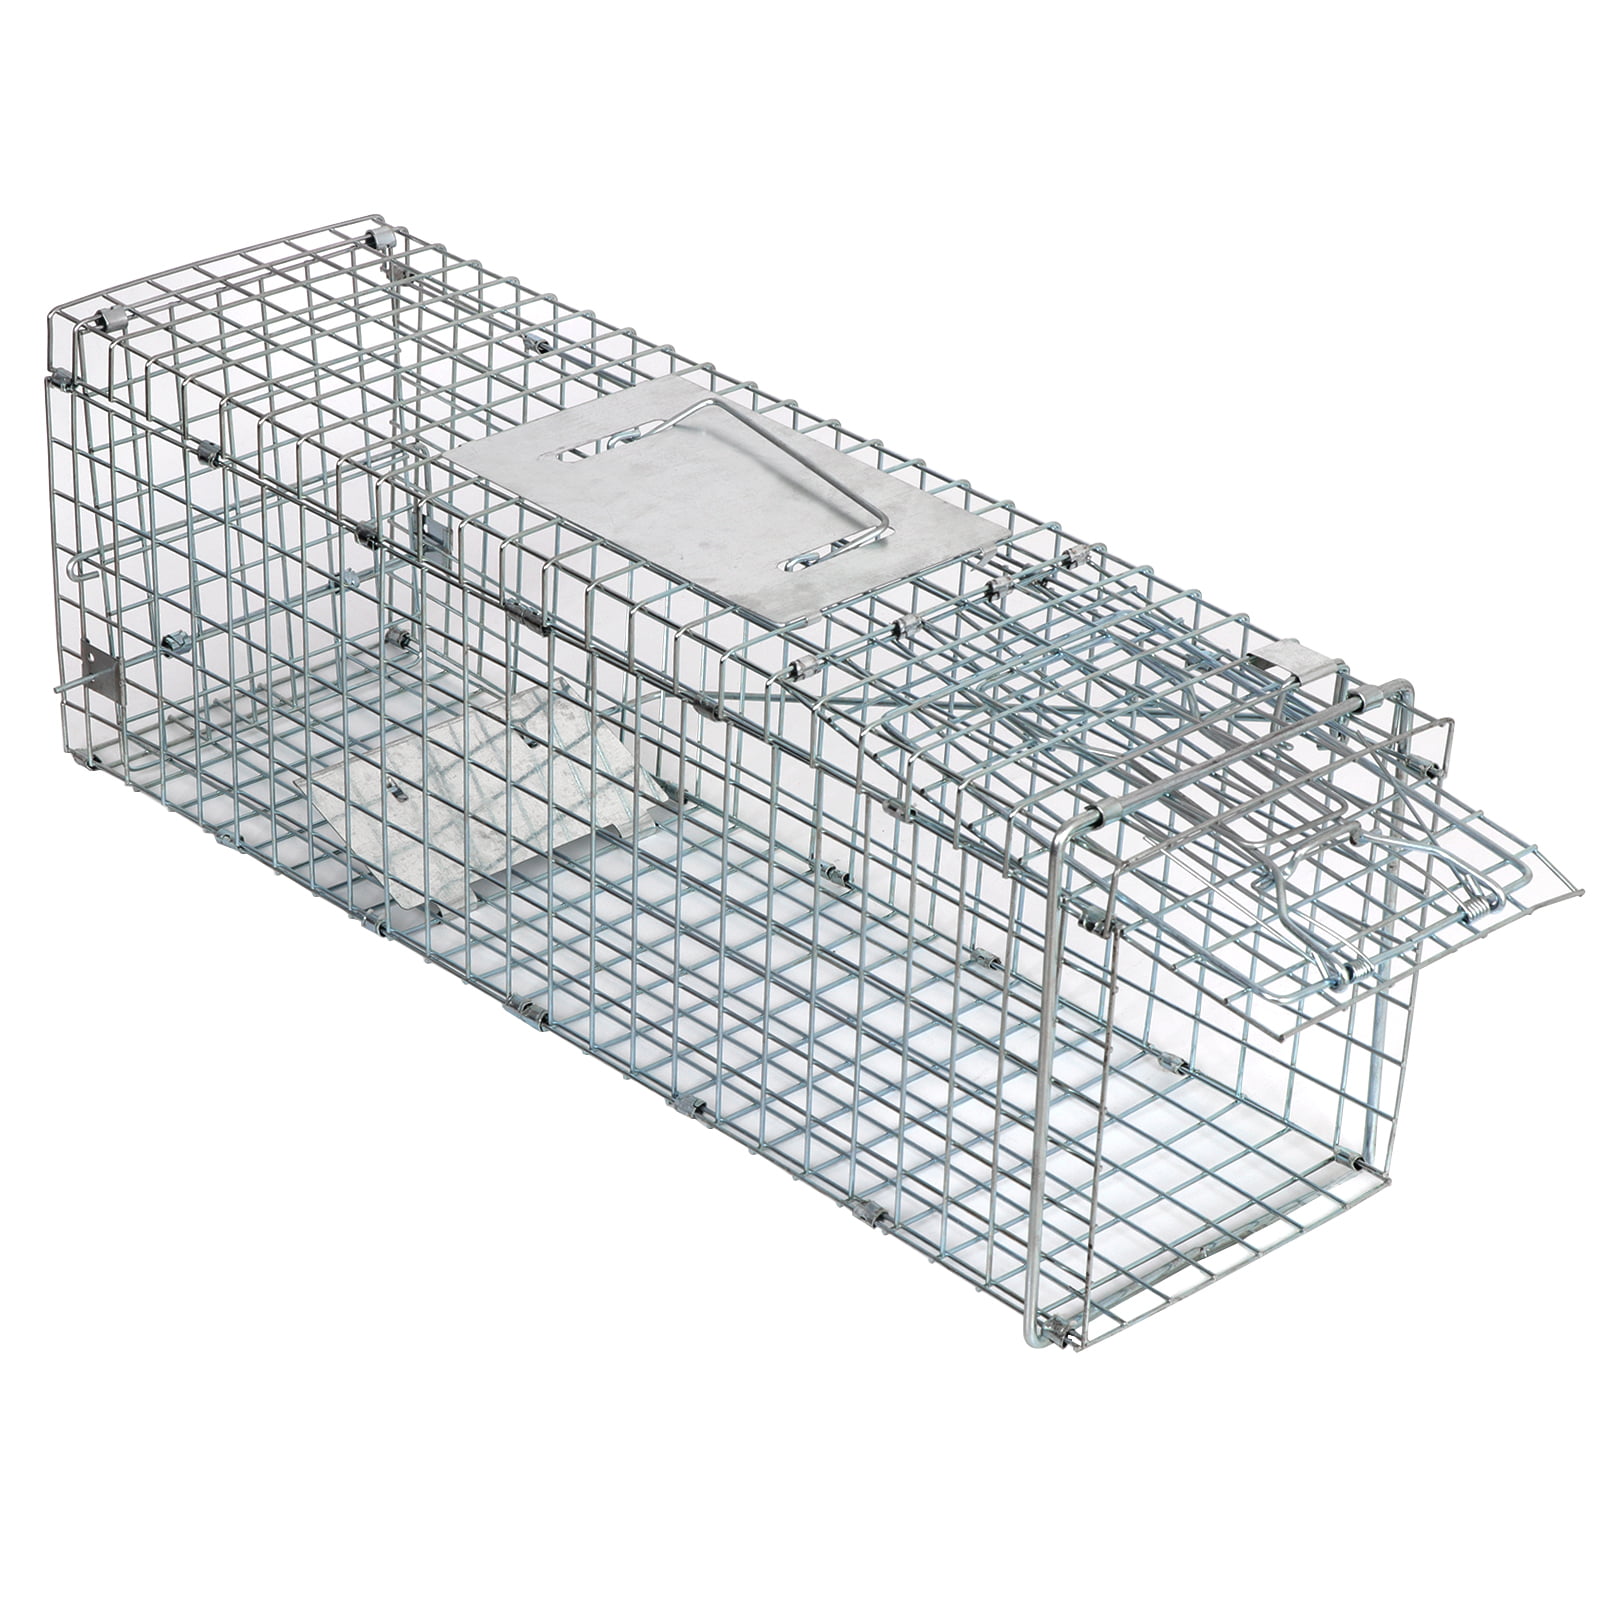 kydely Live Animal Trap Extra Large Rodent Cage Garden Rabbit Raccoon Cat  24X8X 7